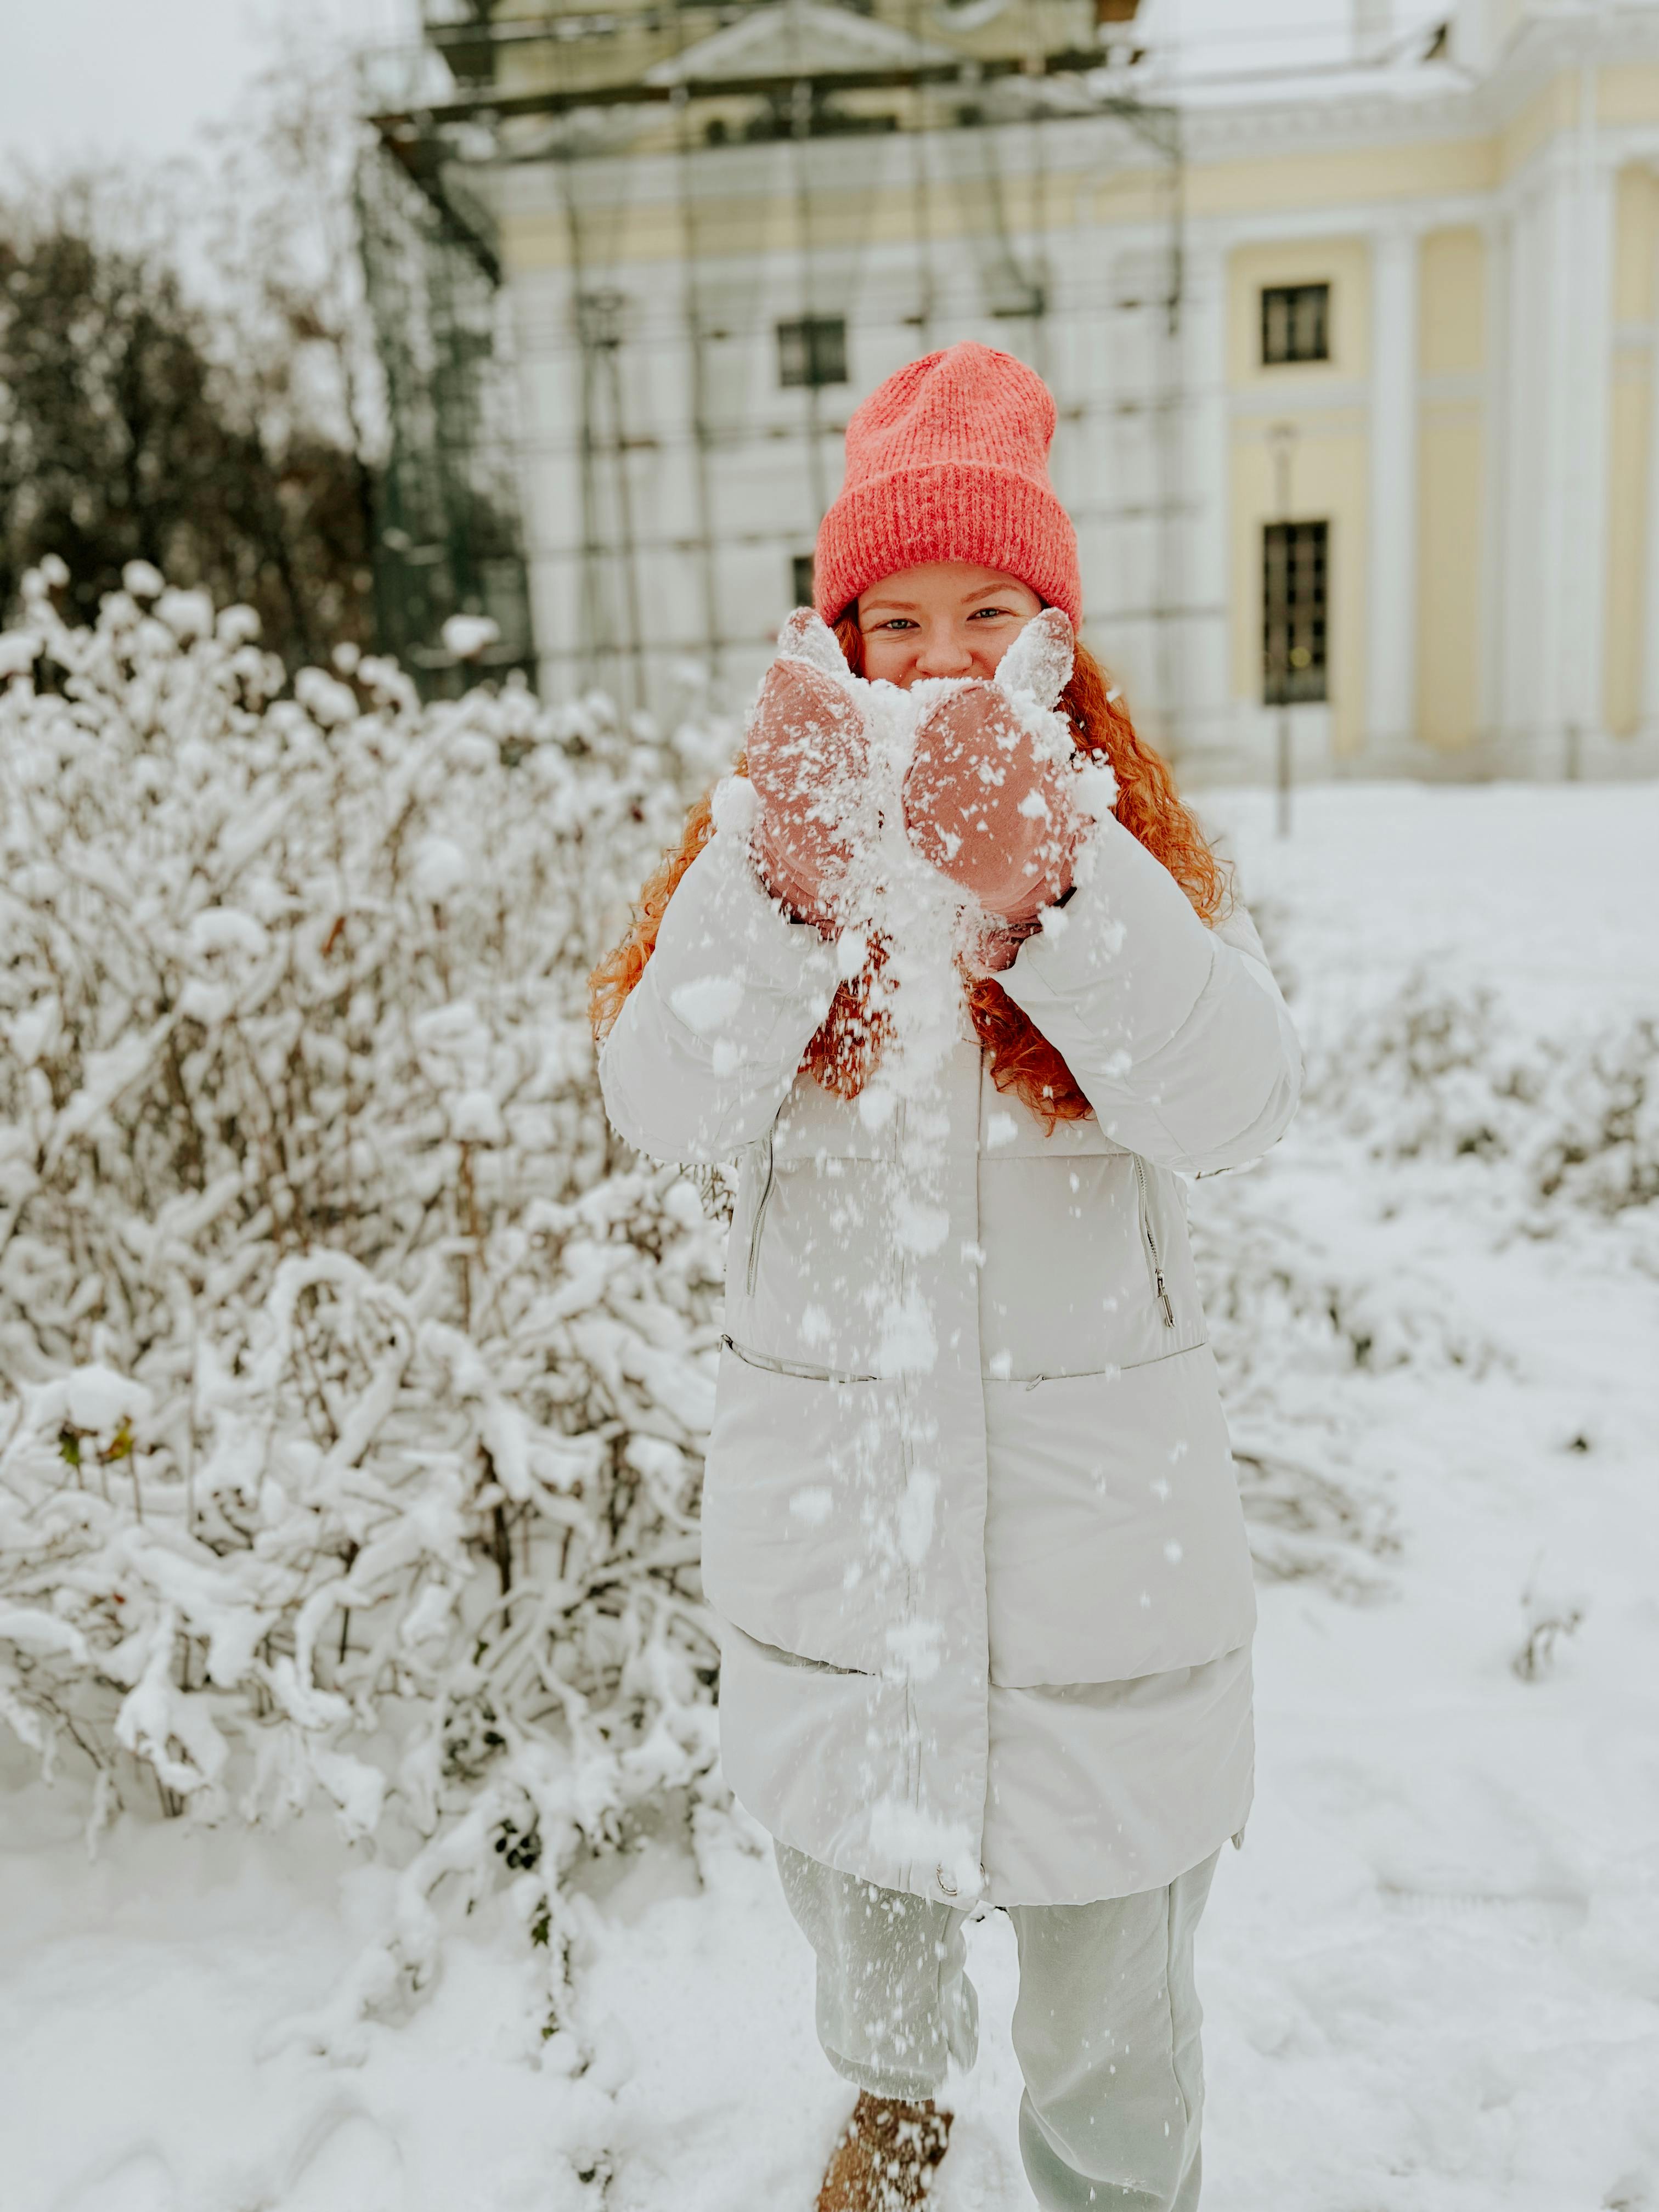 Woman Wearing a Fashionable Winter Outfit Standing Outside · Free Stock  Photo